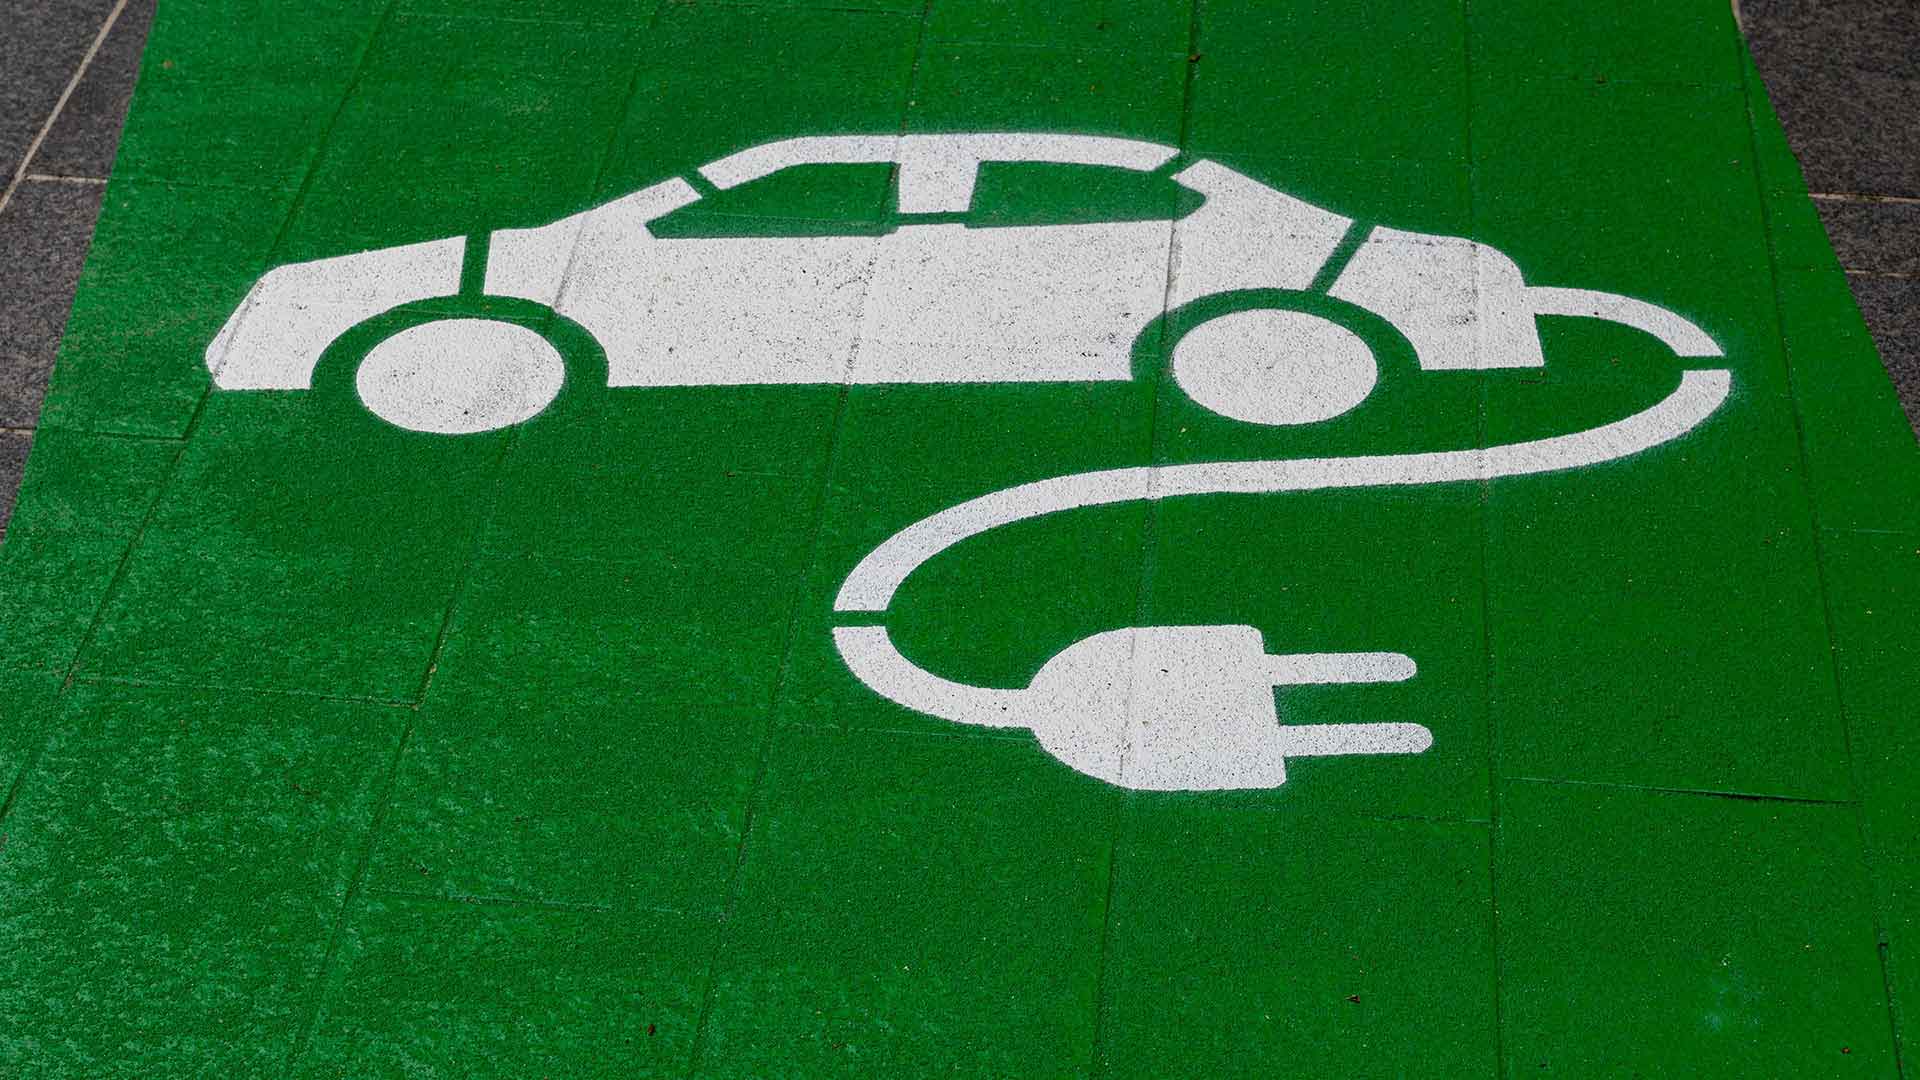 A street decal for EVs or EV fleets